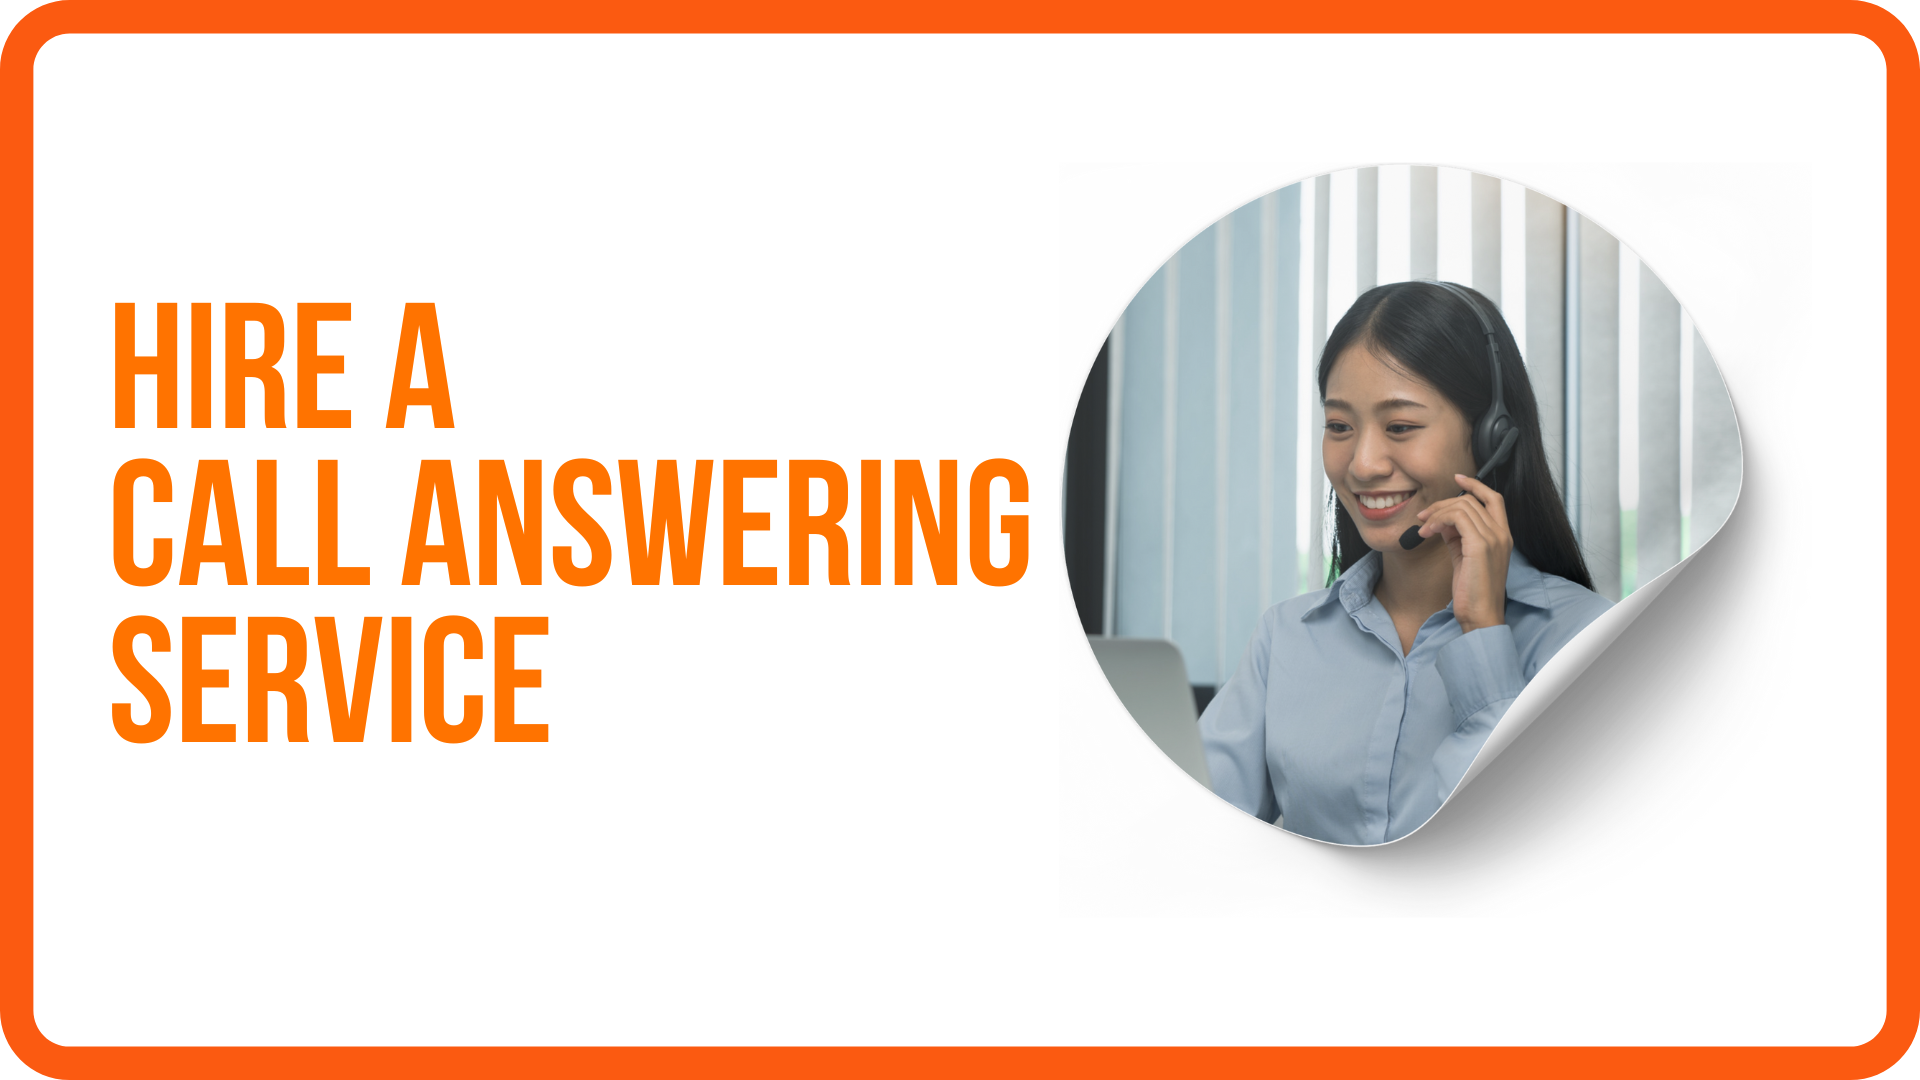 Hire a Call Answering Service: Why Companies Worldwide Can Benefit